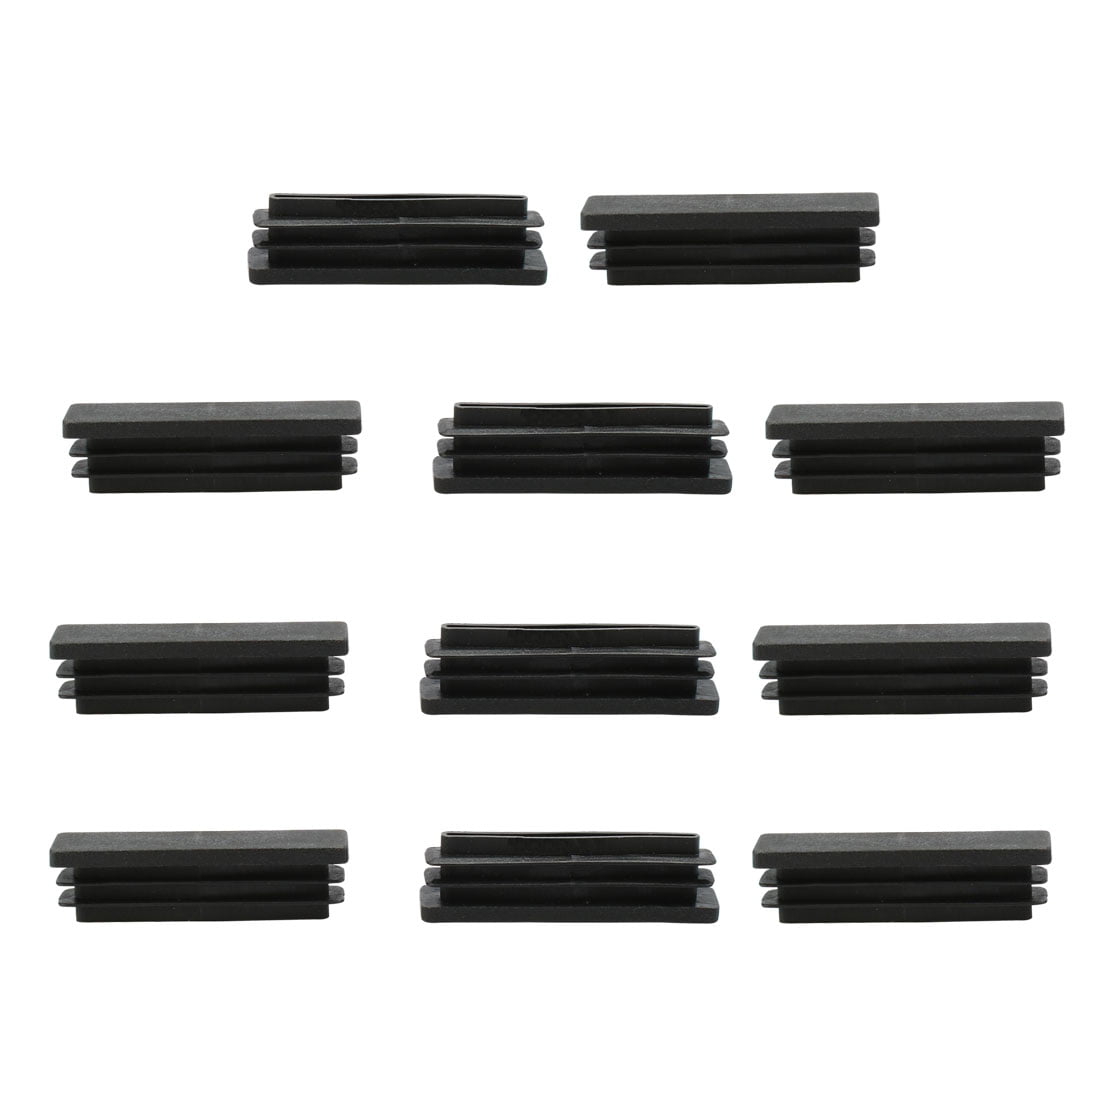 uxcell 9pcs Plastic Rectangle 20 x 40mm Ribbed Tube Inserts Pipe Tubing End Cover Caps Furniture Glide Table Legs Floor Protector Black 